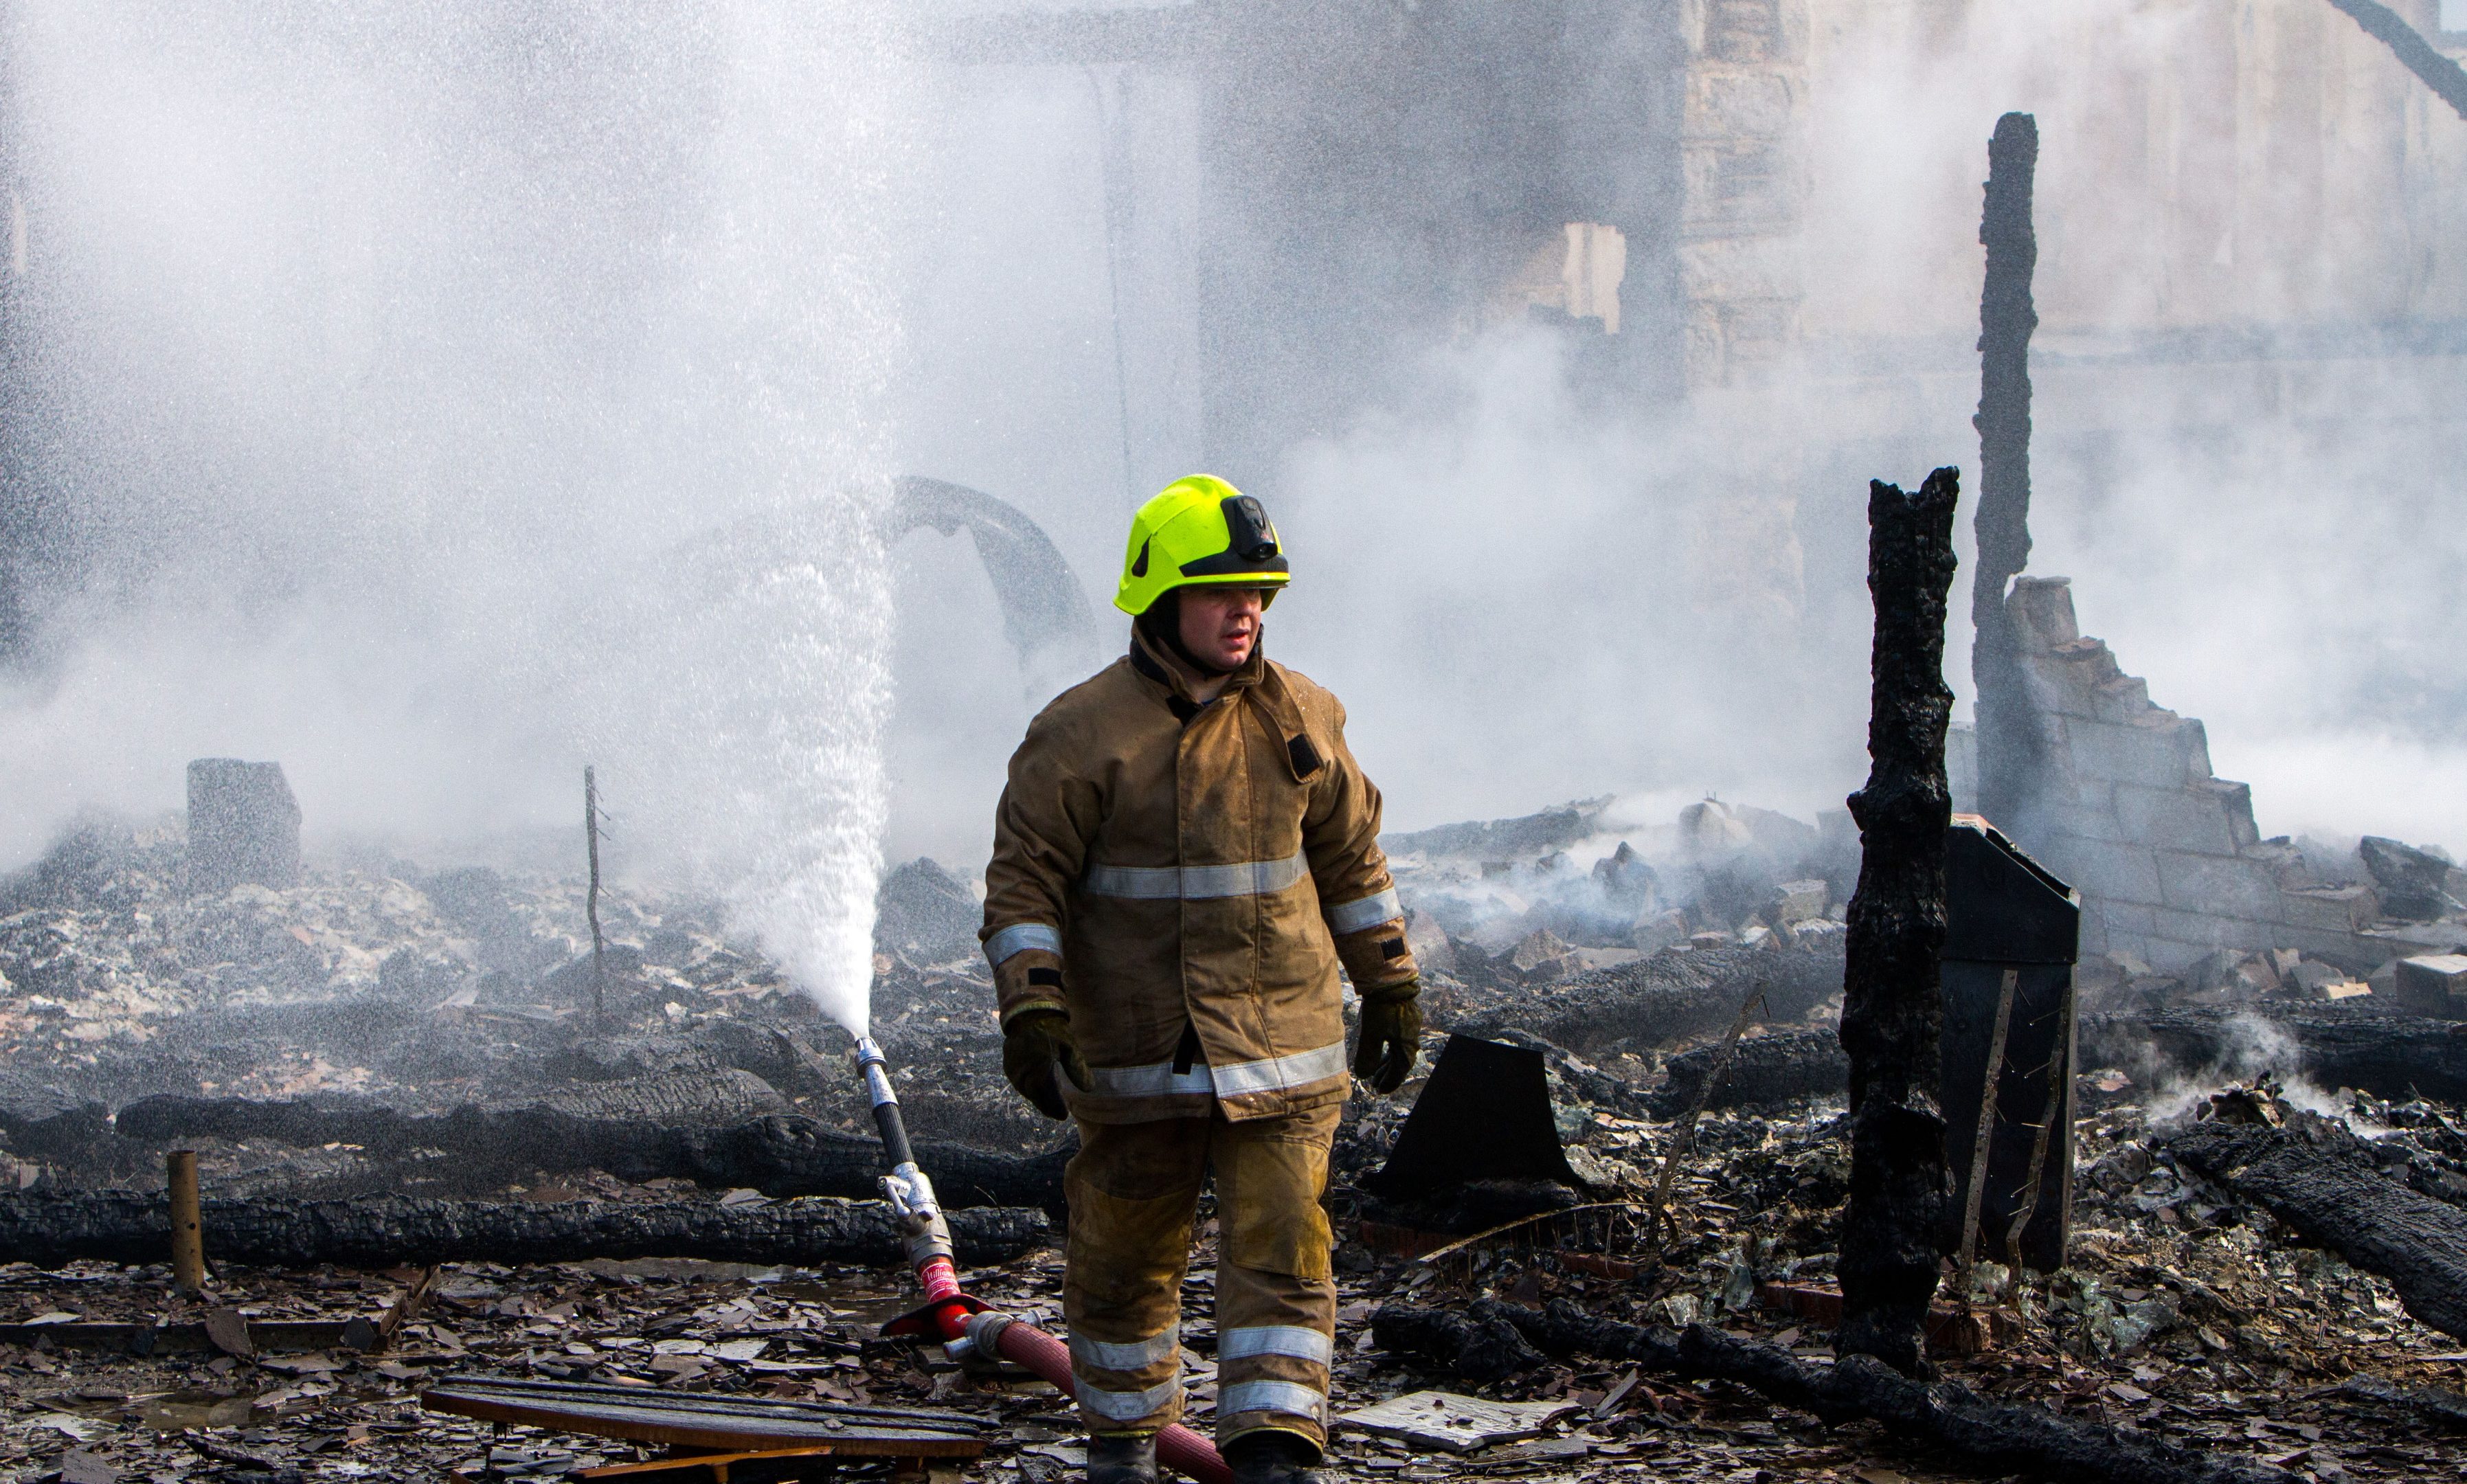 Fire crews at the scene of the Spittal of Glenshee Hotel fire in August 2014.